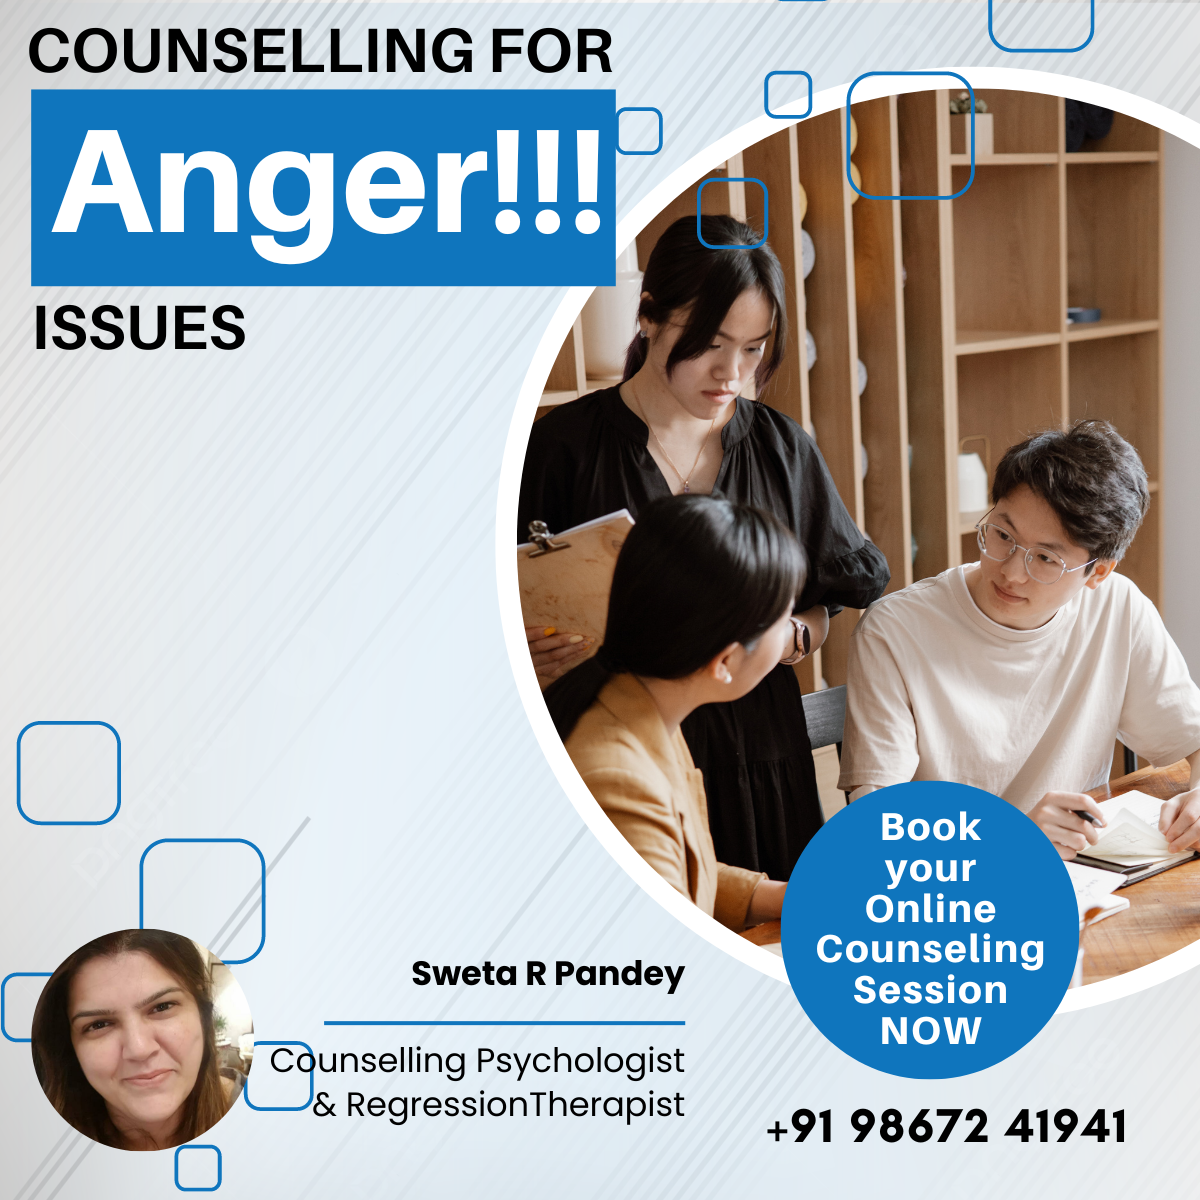 Counselling for Anger Issues - Sweta R Pandey - Kochi